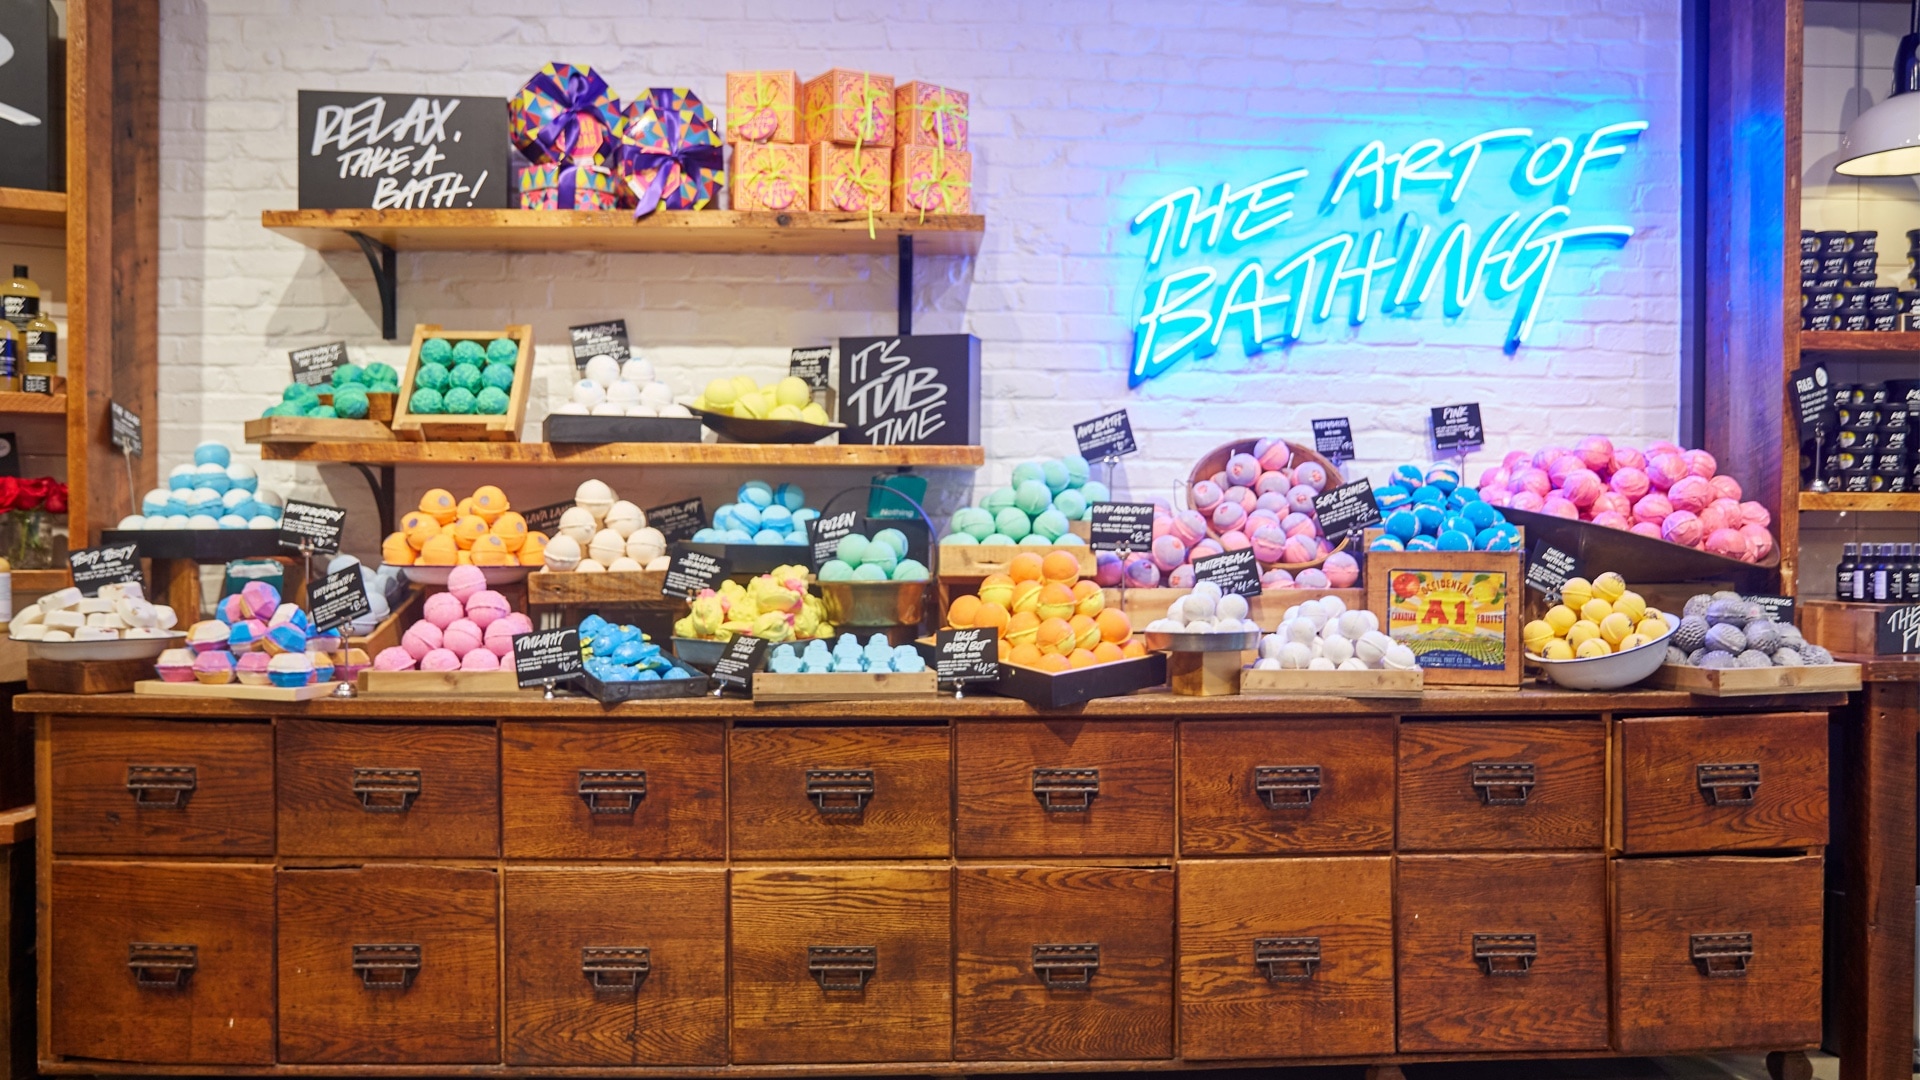 "The Art of Bathing" is written against a wall in a blue neon sign, below is a table filled with neat piles of colour-coded bath products with chalk signs that say "Relax take a Bath" and "It's Tub Time"